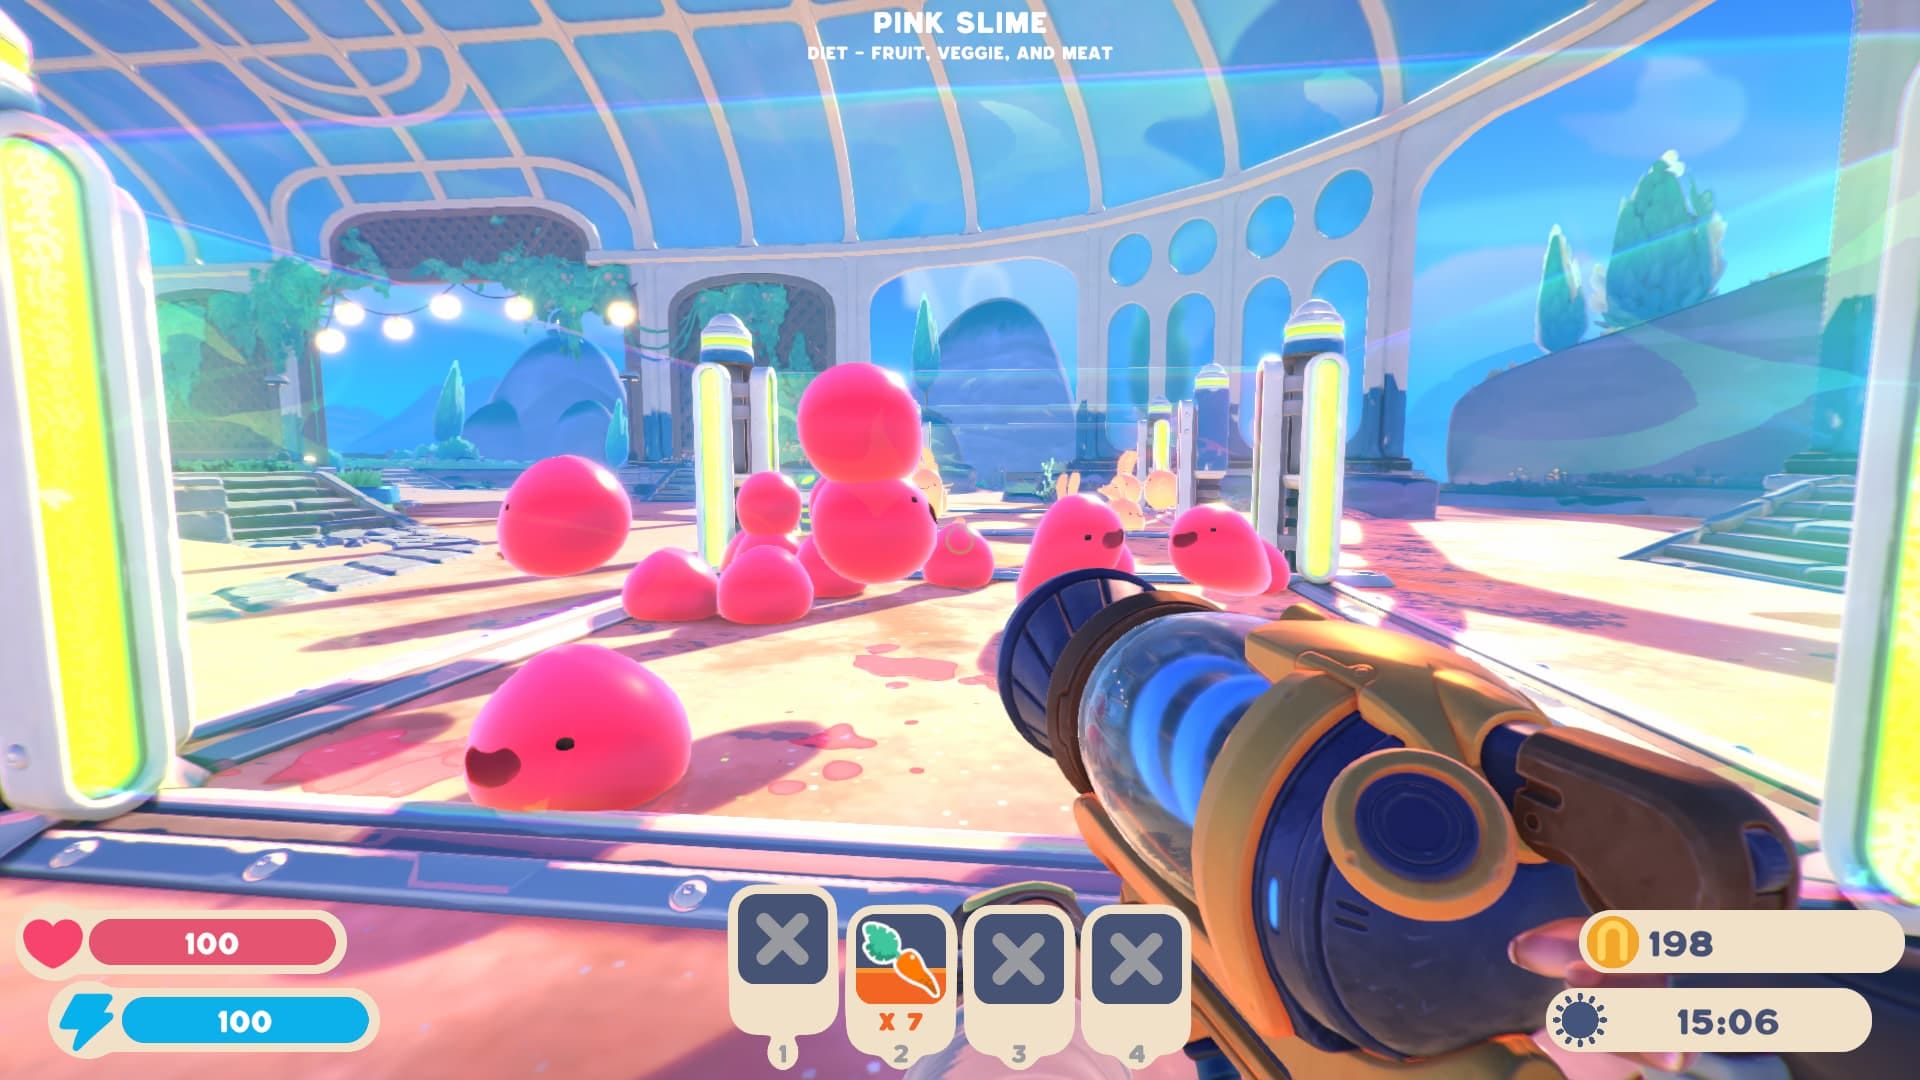 Slime Rancher 2 enters Early Access in September